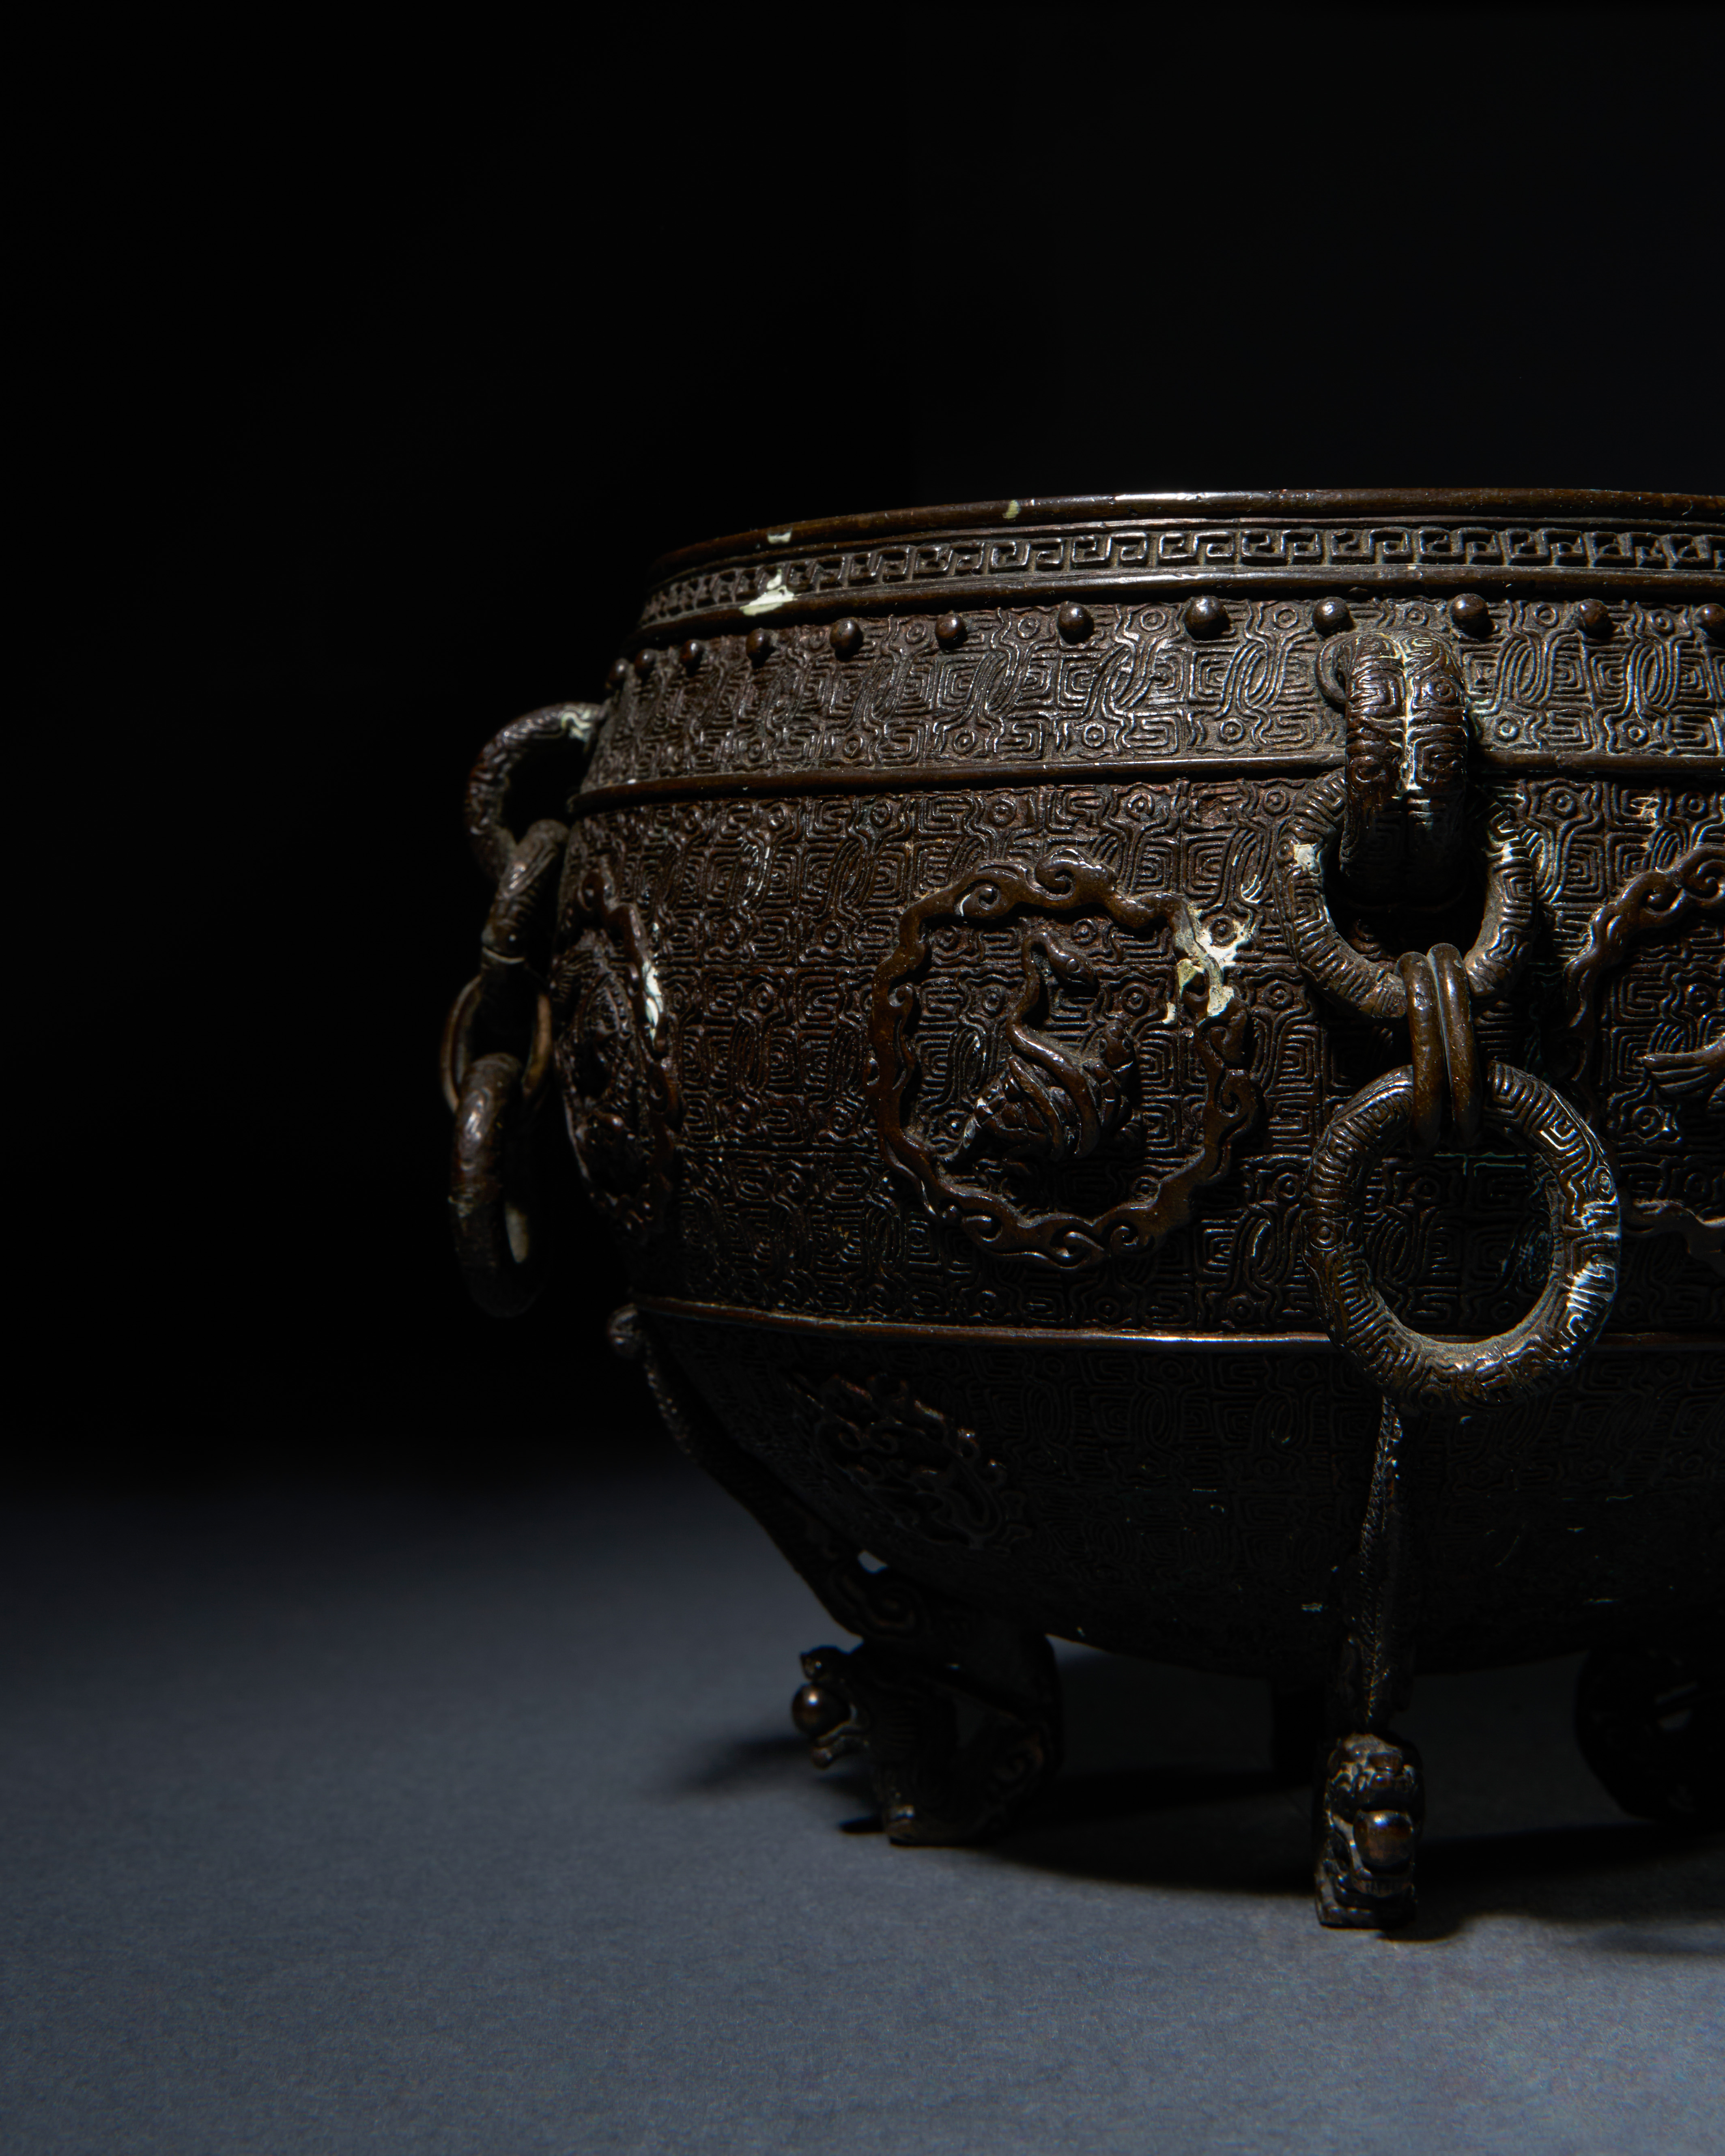 AN ARCHAISTIC BRONZE CENSER, QING DYNASTY (1644-1911) - Image 2 of 6